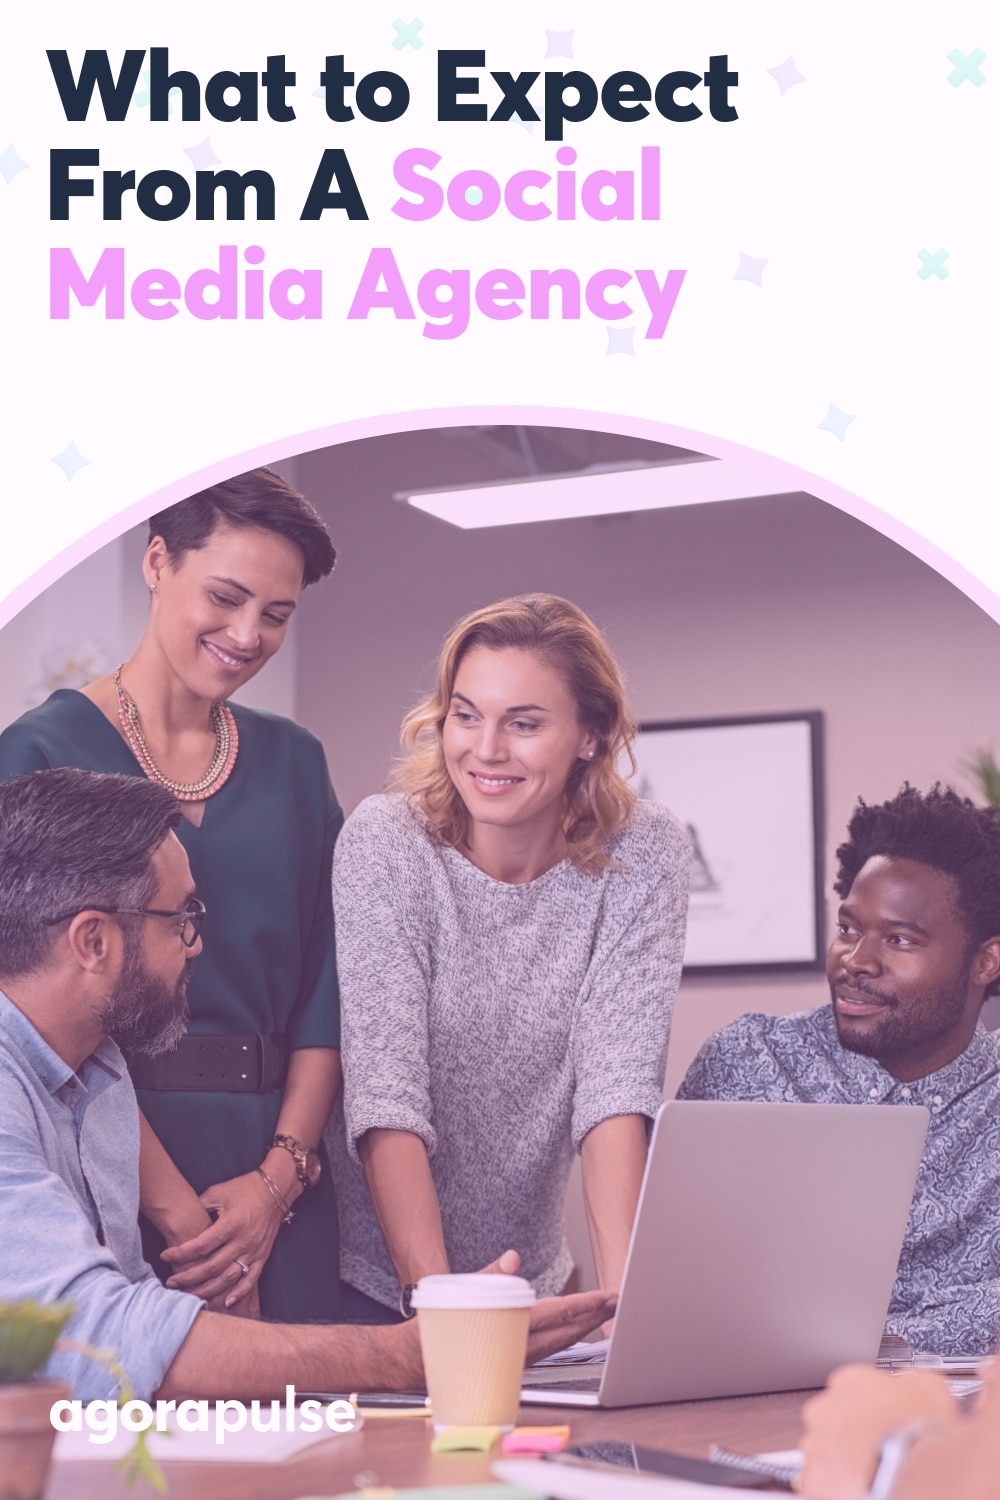 What Clients Can Expect From a Social Media Marketing Agency